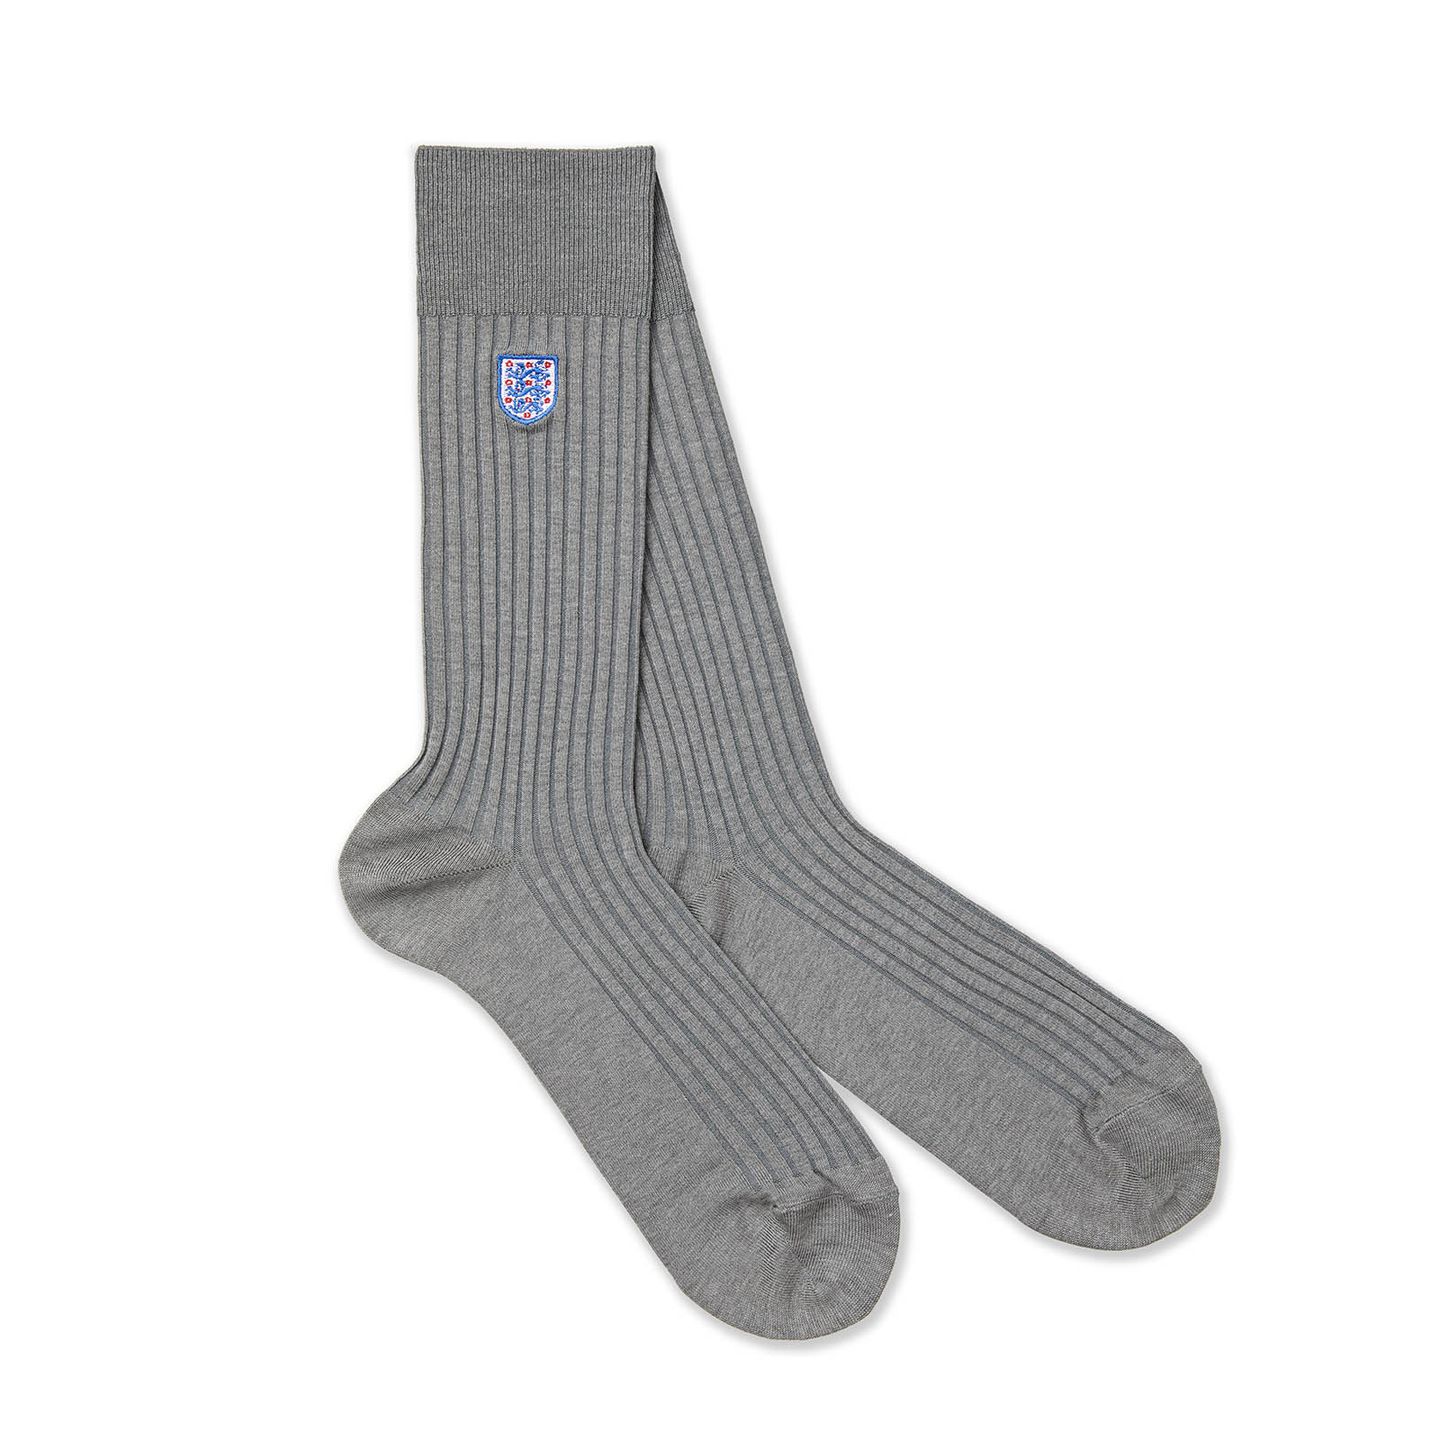 A pair of light grey socks with the England badge on them